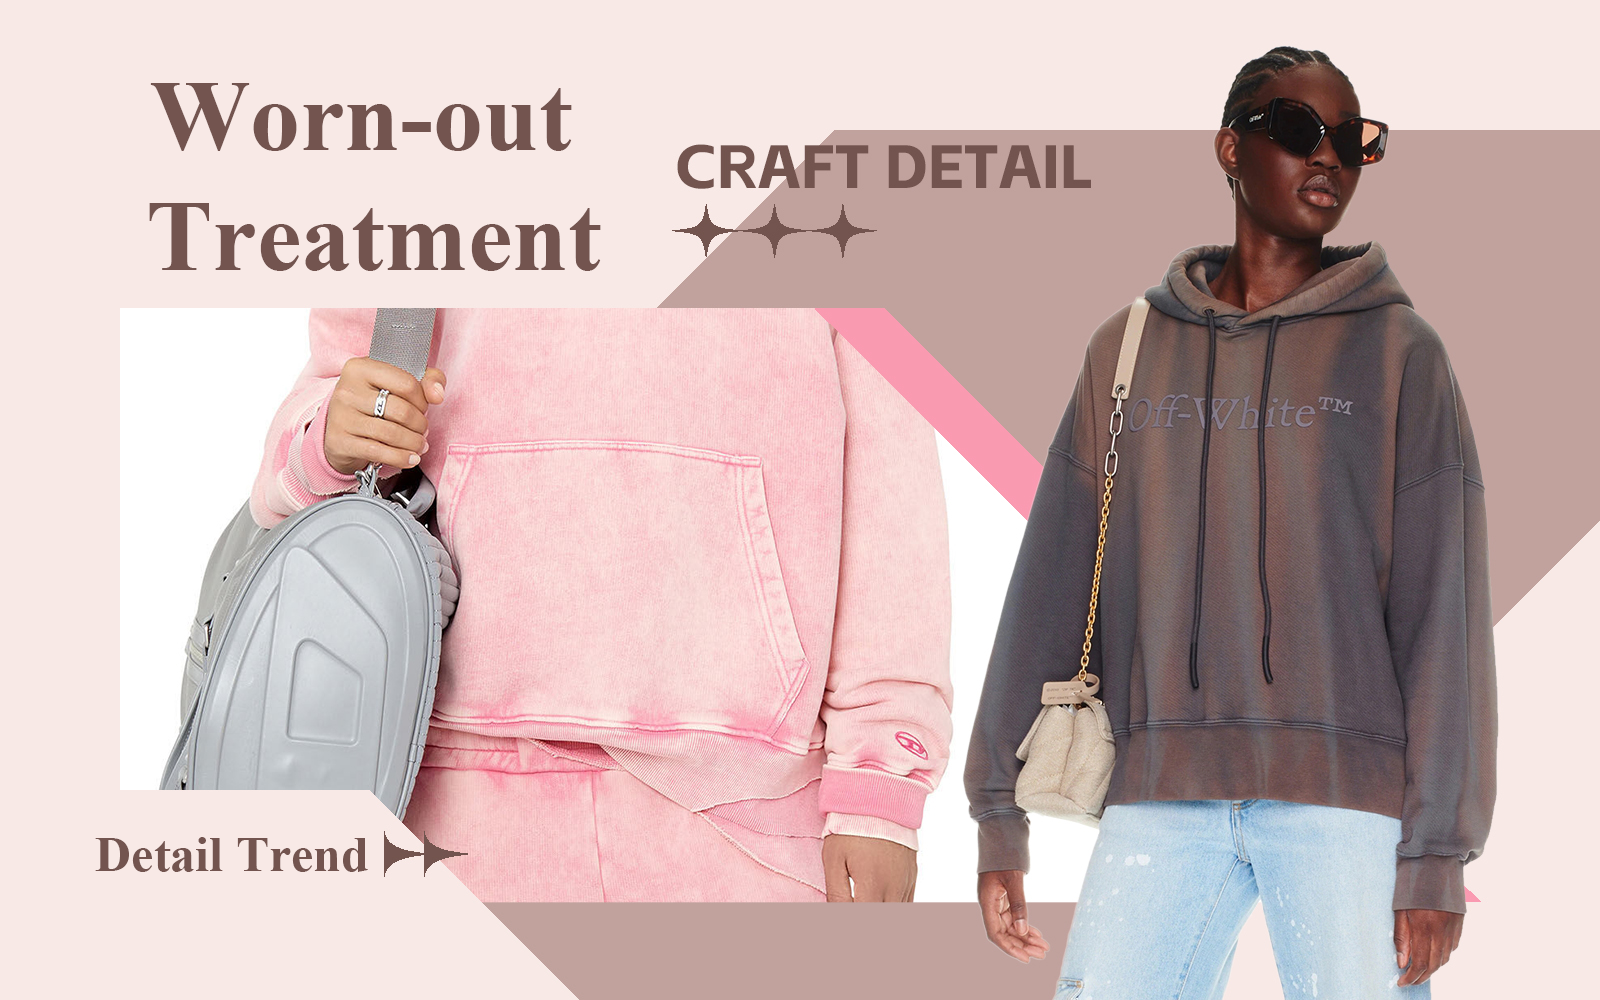 Worn-out Treatment -- The Detail & Craft Trend for Women's Sweatshirt